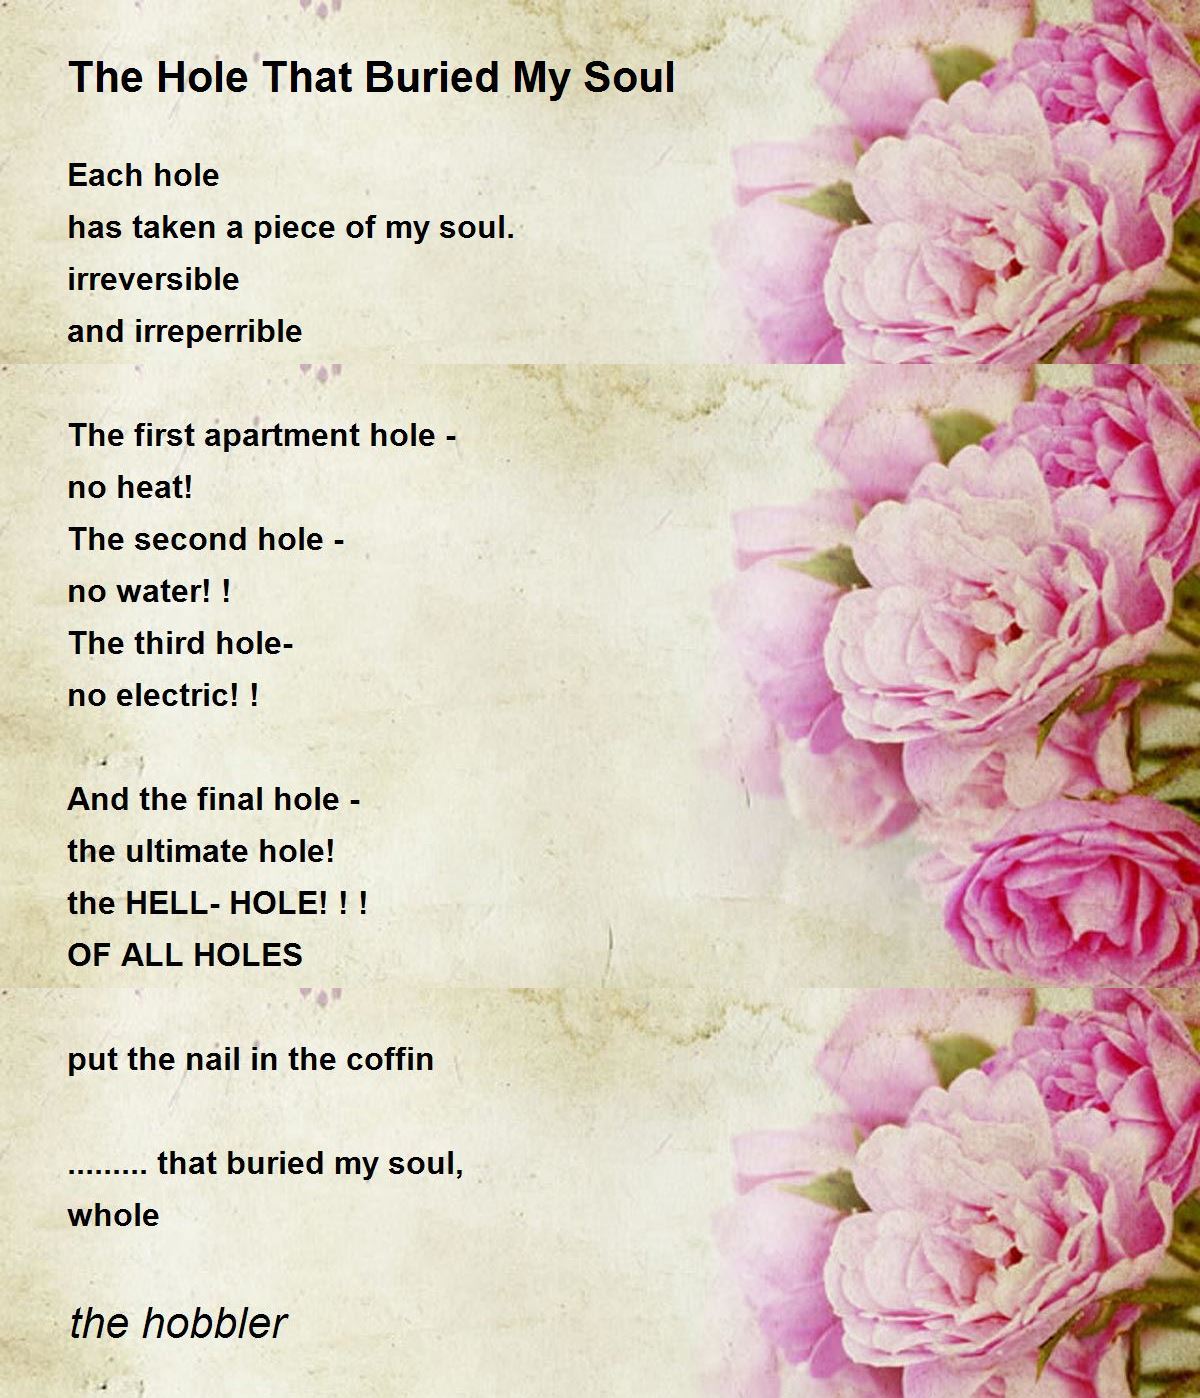 The Hole That Buried My Soul - The Hole That Buried My Soul Poem.